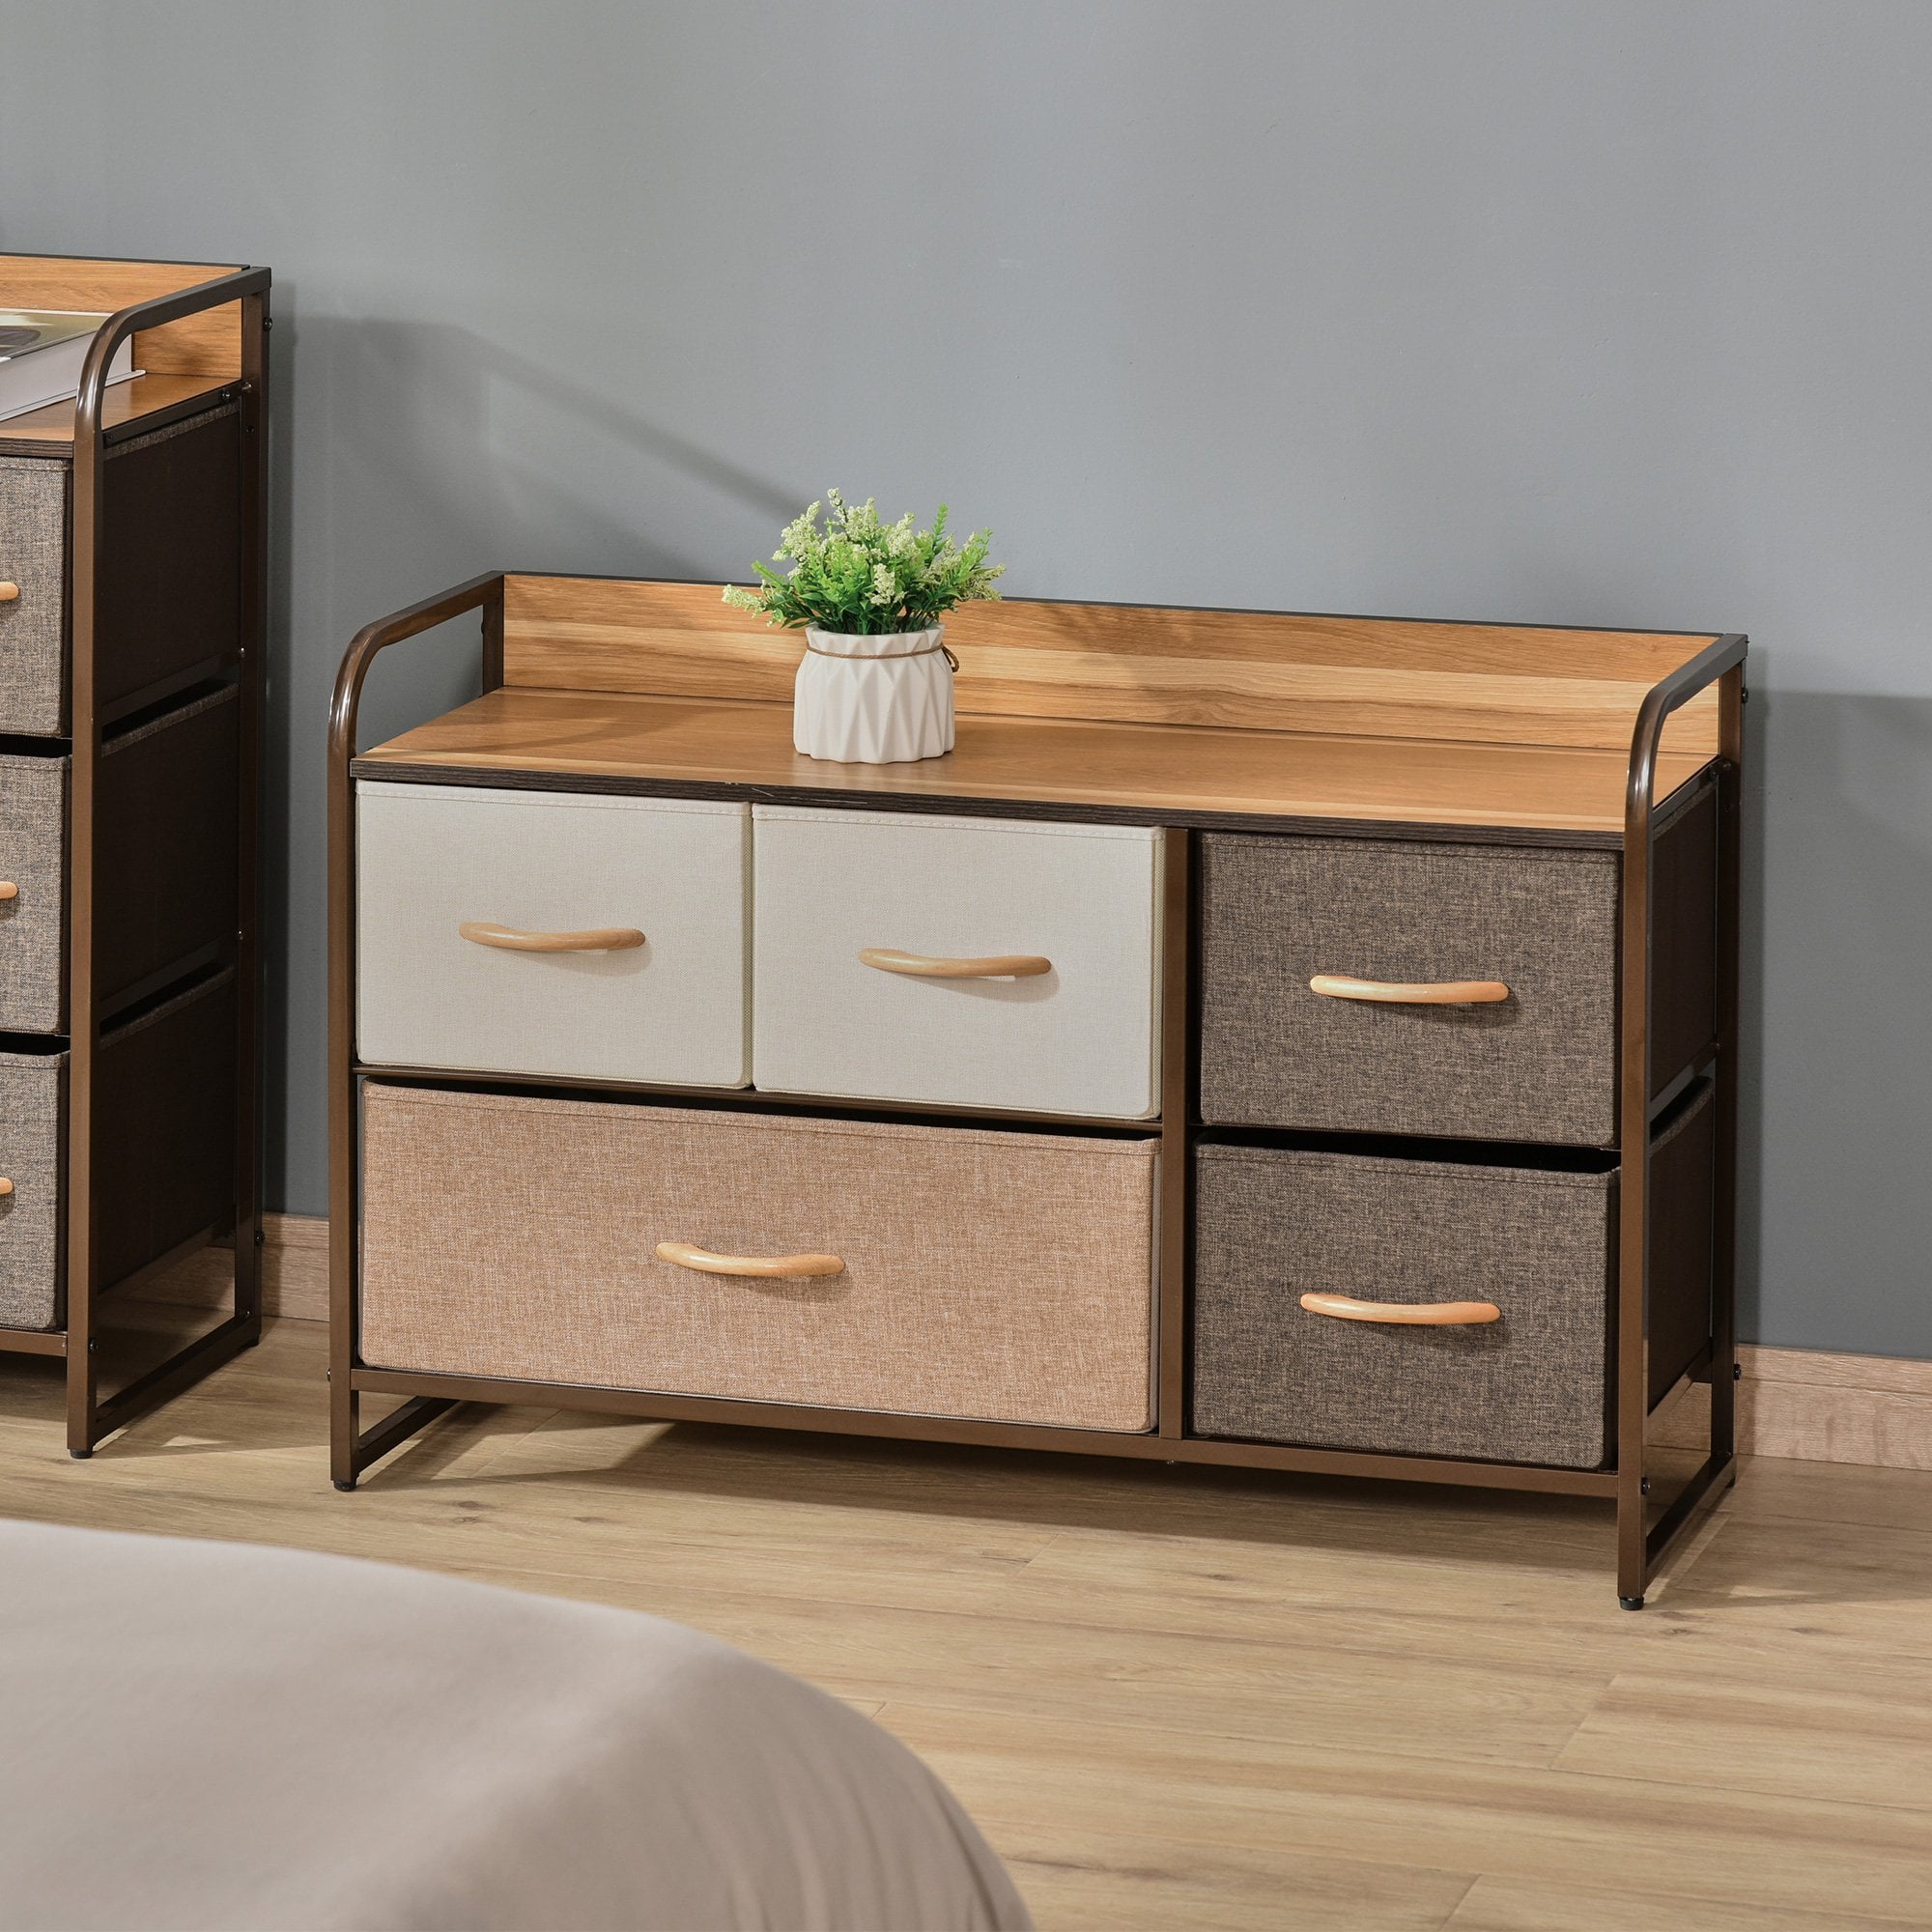 5-Drawer Dresser - Linen Fabric Chest of Drawers - Dresser Tower Unit for Bedroom Hallway Entryway - Storage Organizer with Steel Frame Wooden Top Dra